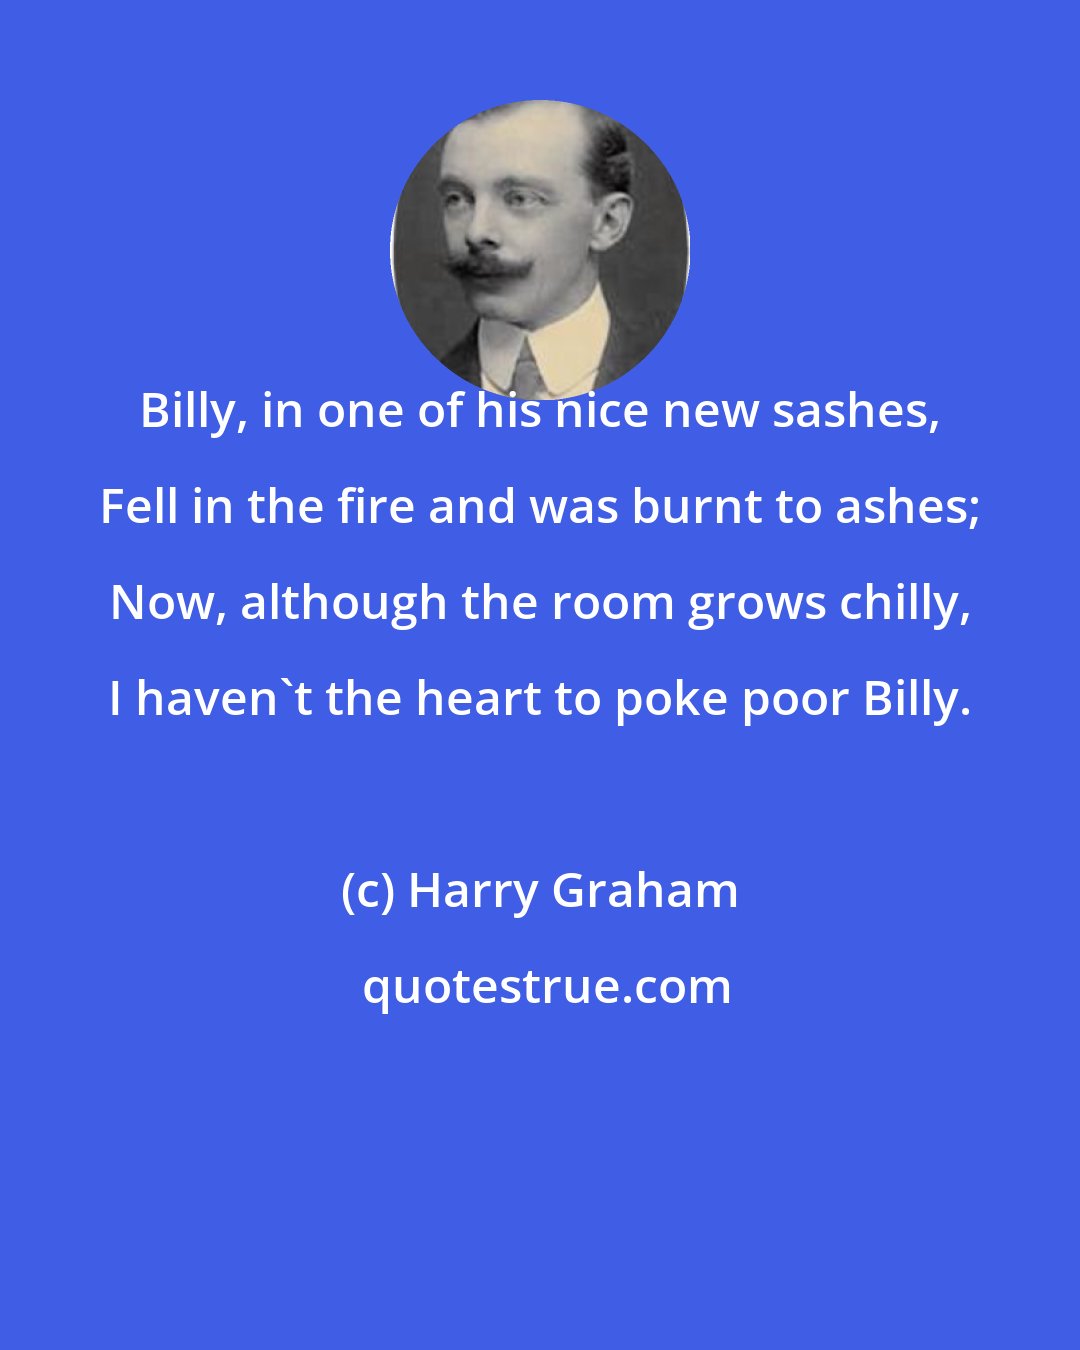 Harry Graham: Billy, in one of his nice new sashes, Fell in the fire and was burnt to ashes; Now, although the room grows chilly, I haven't the heart to poke poor Billy.